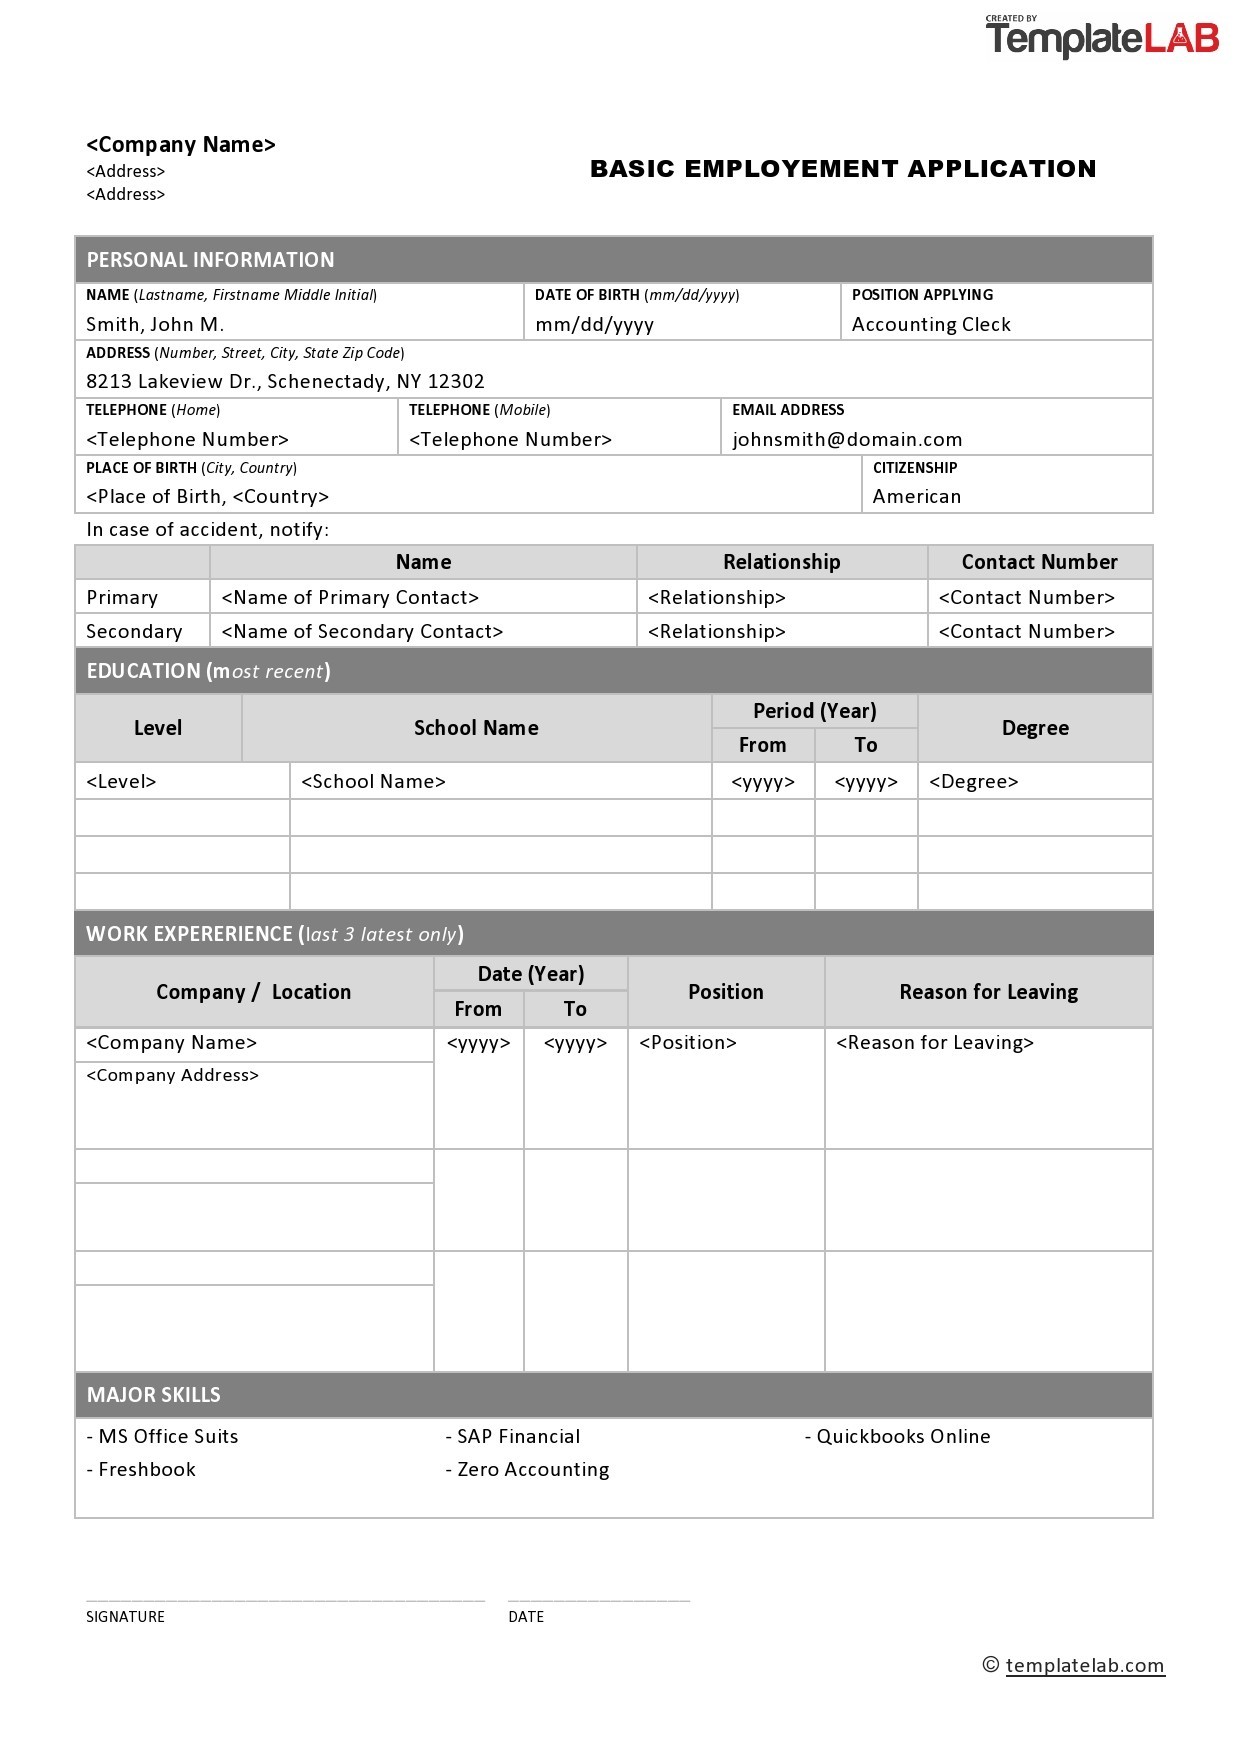 Printable Employment Application Template from templatelab.com